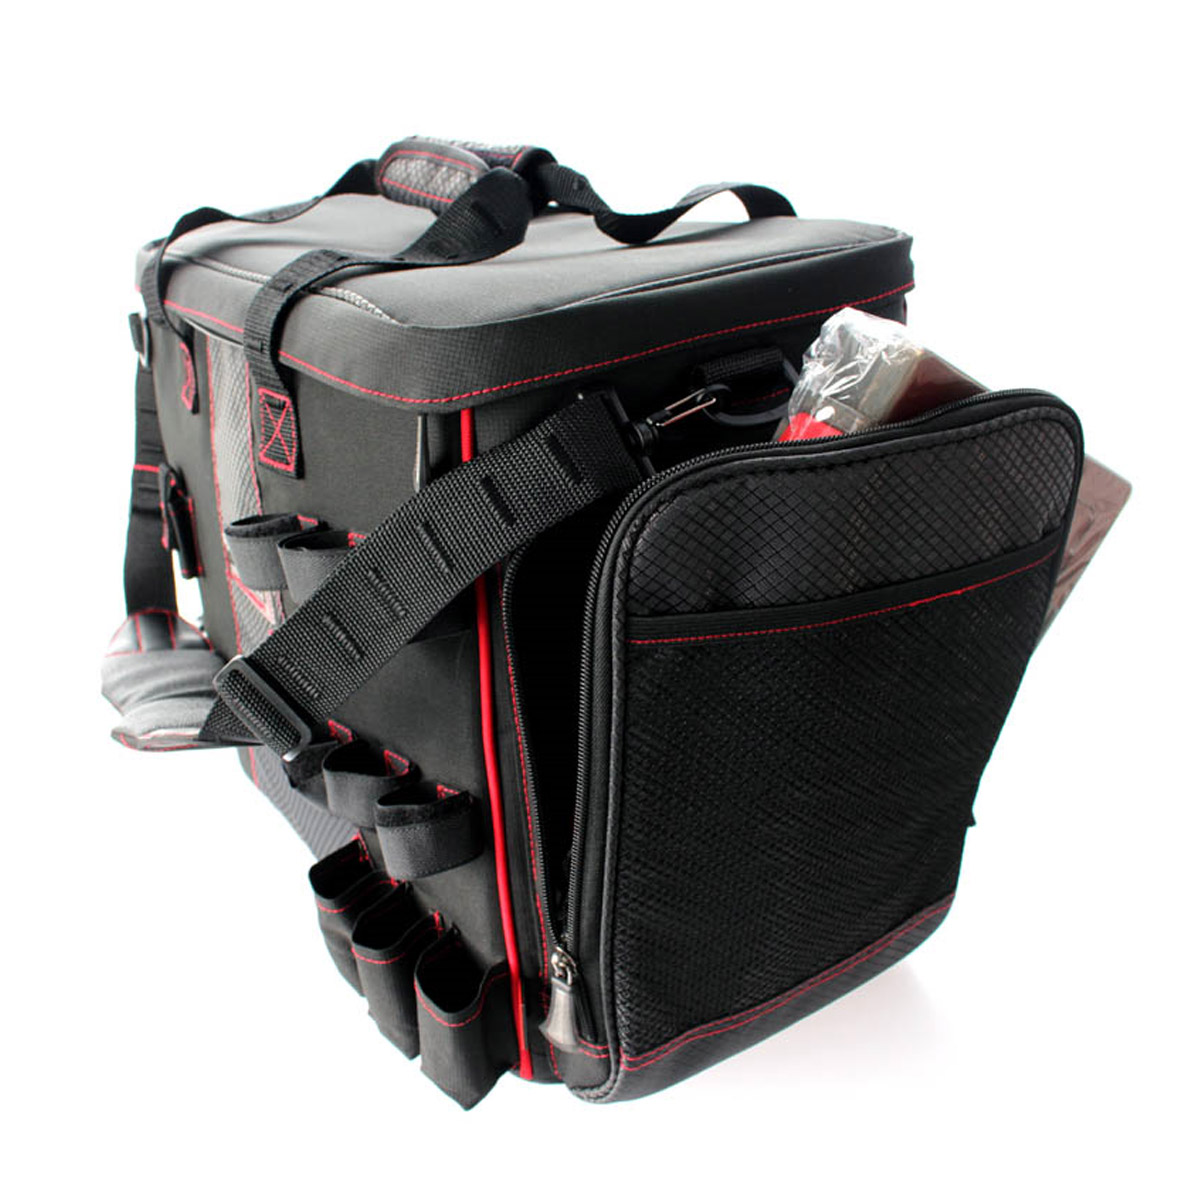 Rozemeijer Tackle Concept Large Carryall